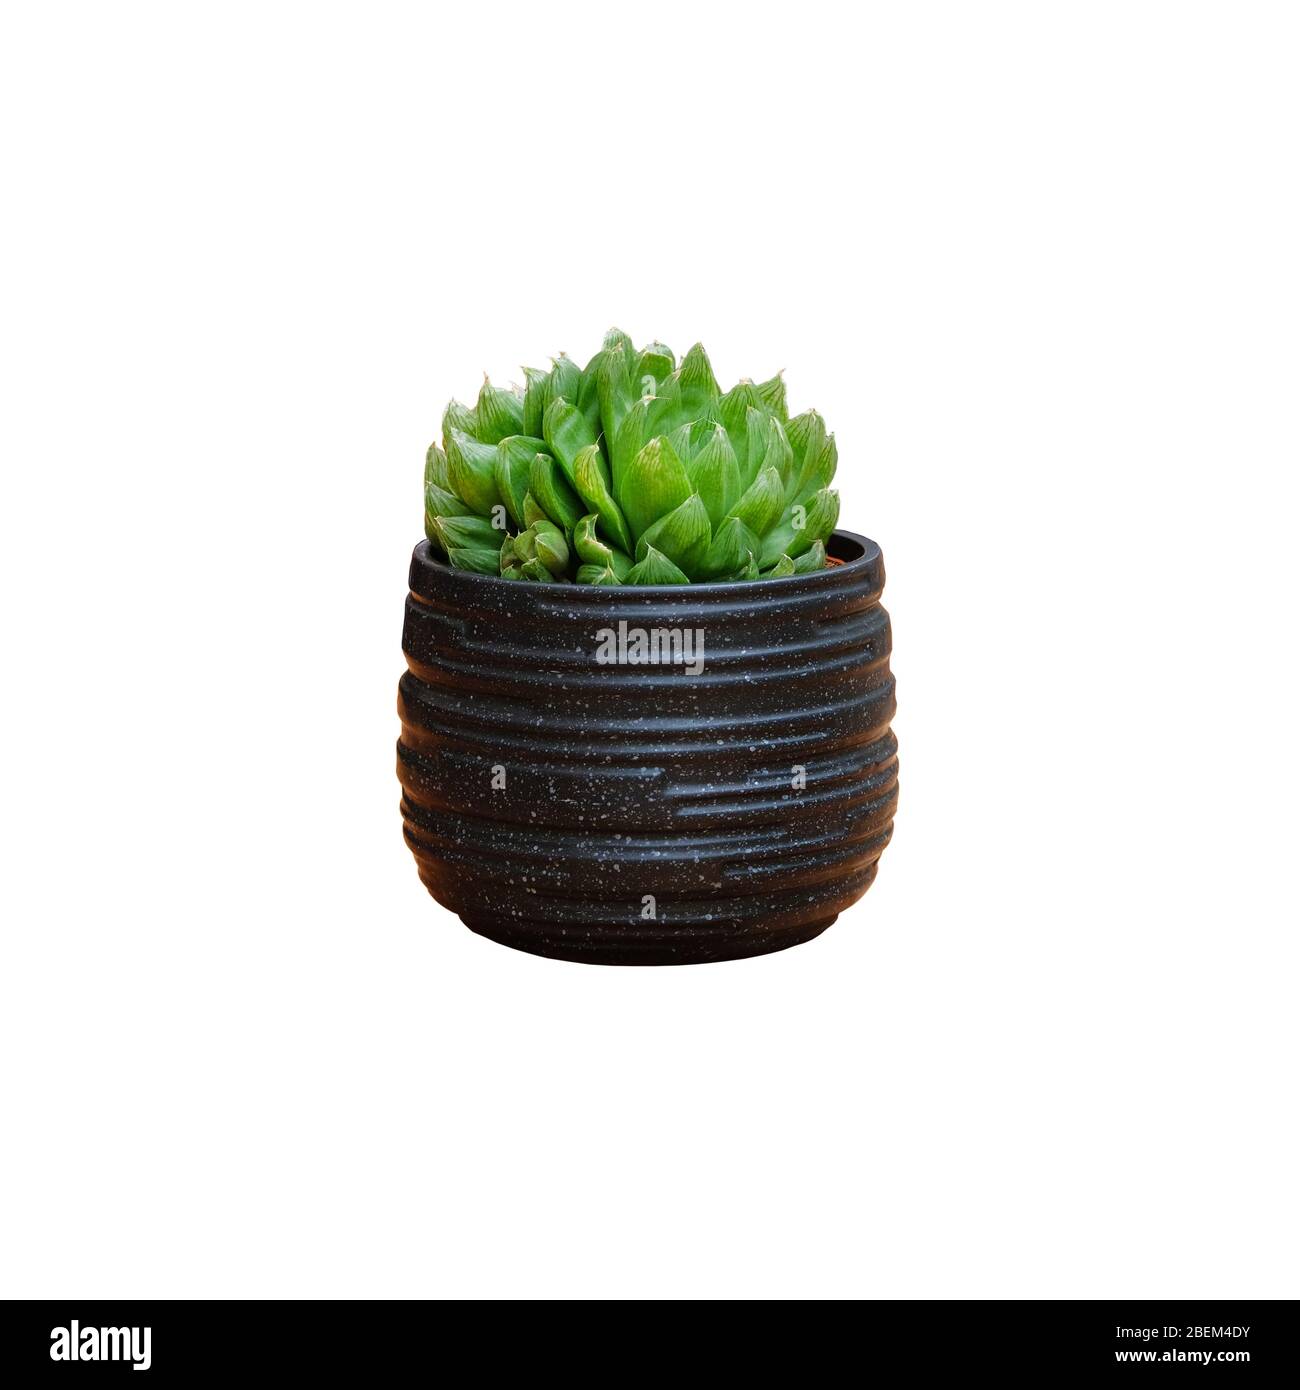 Green succulent house plant in black pot isolated on white background. Stock Photo